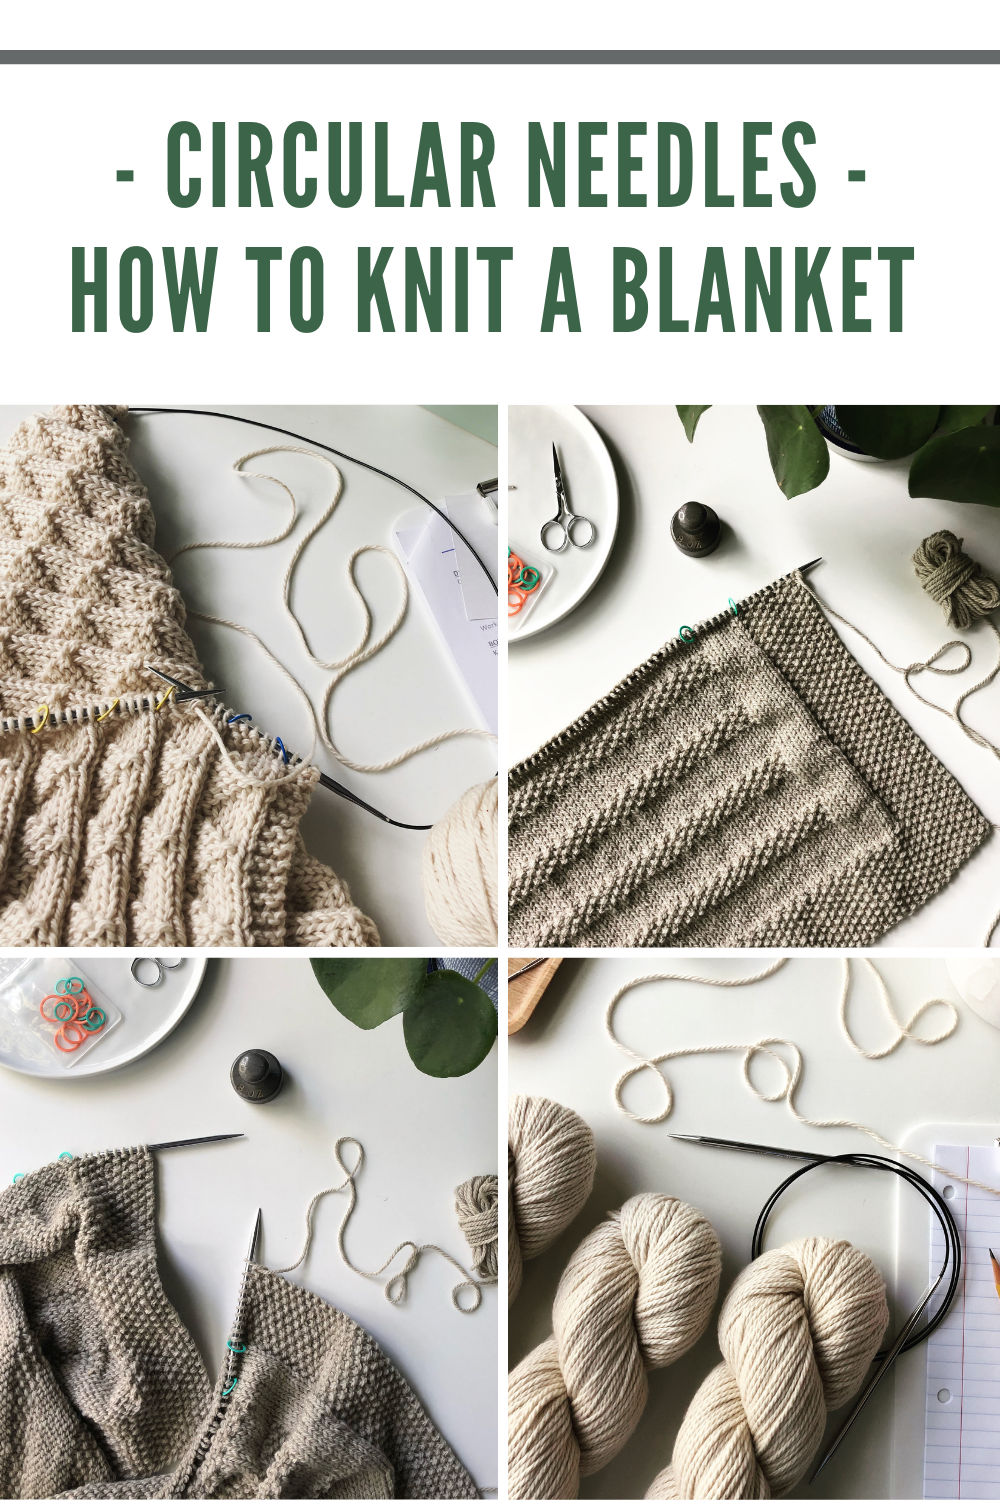 How to Use Long Circular Knitting Needles to Knit a Blanket